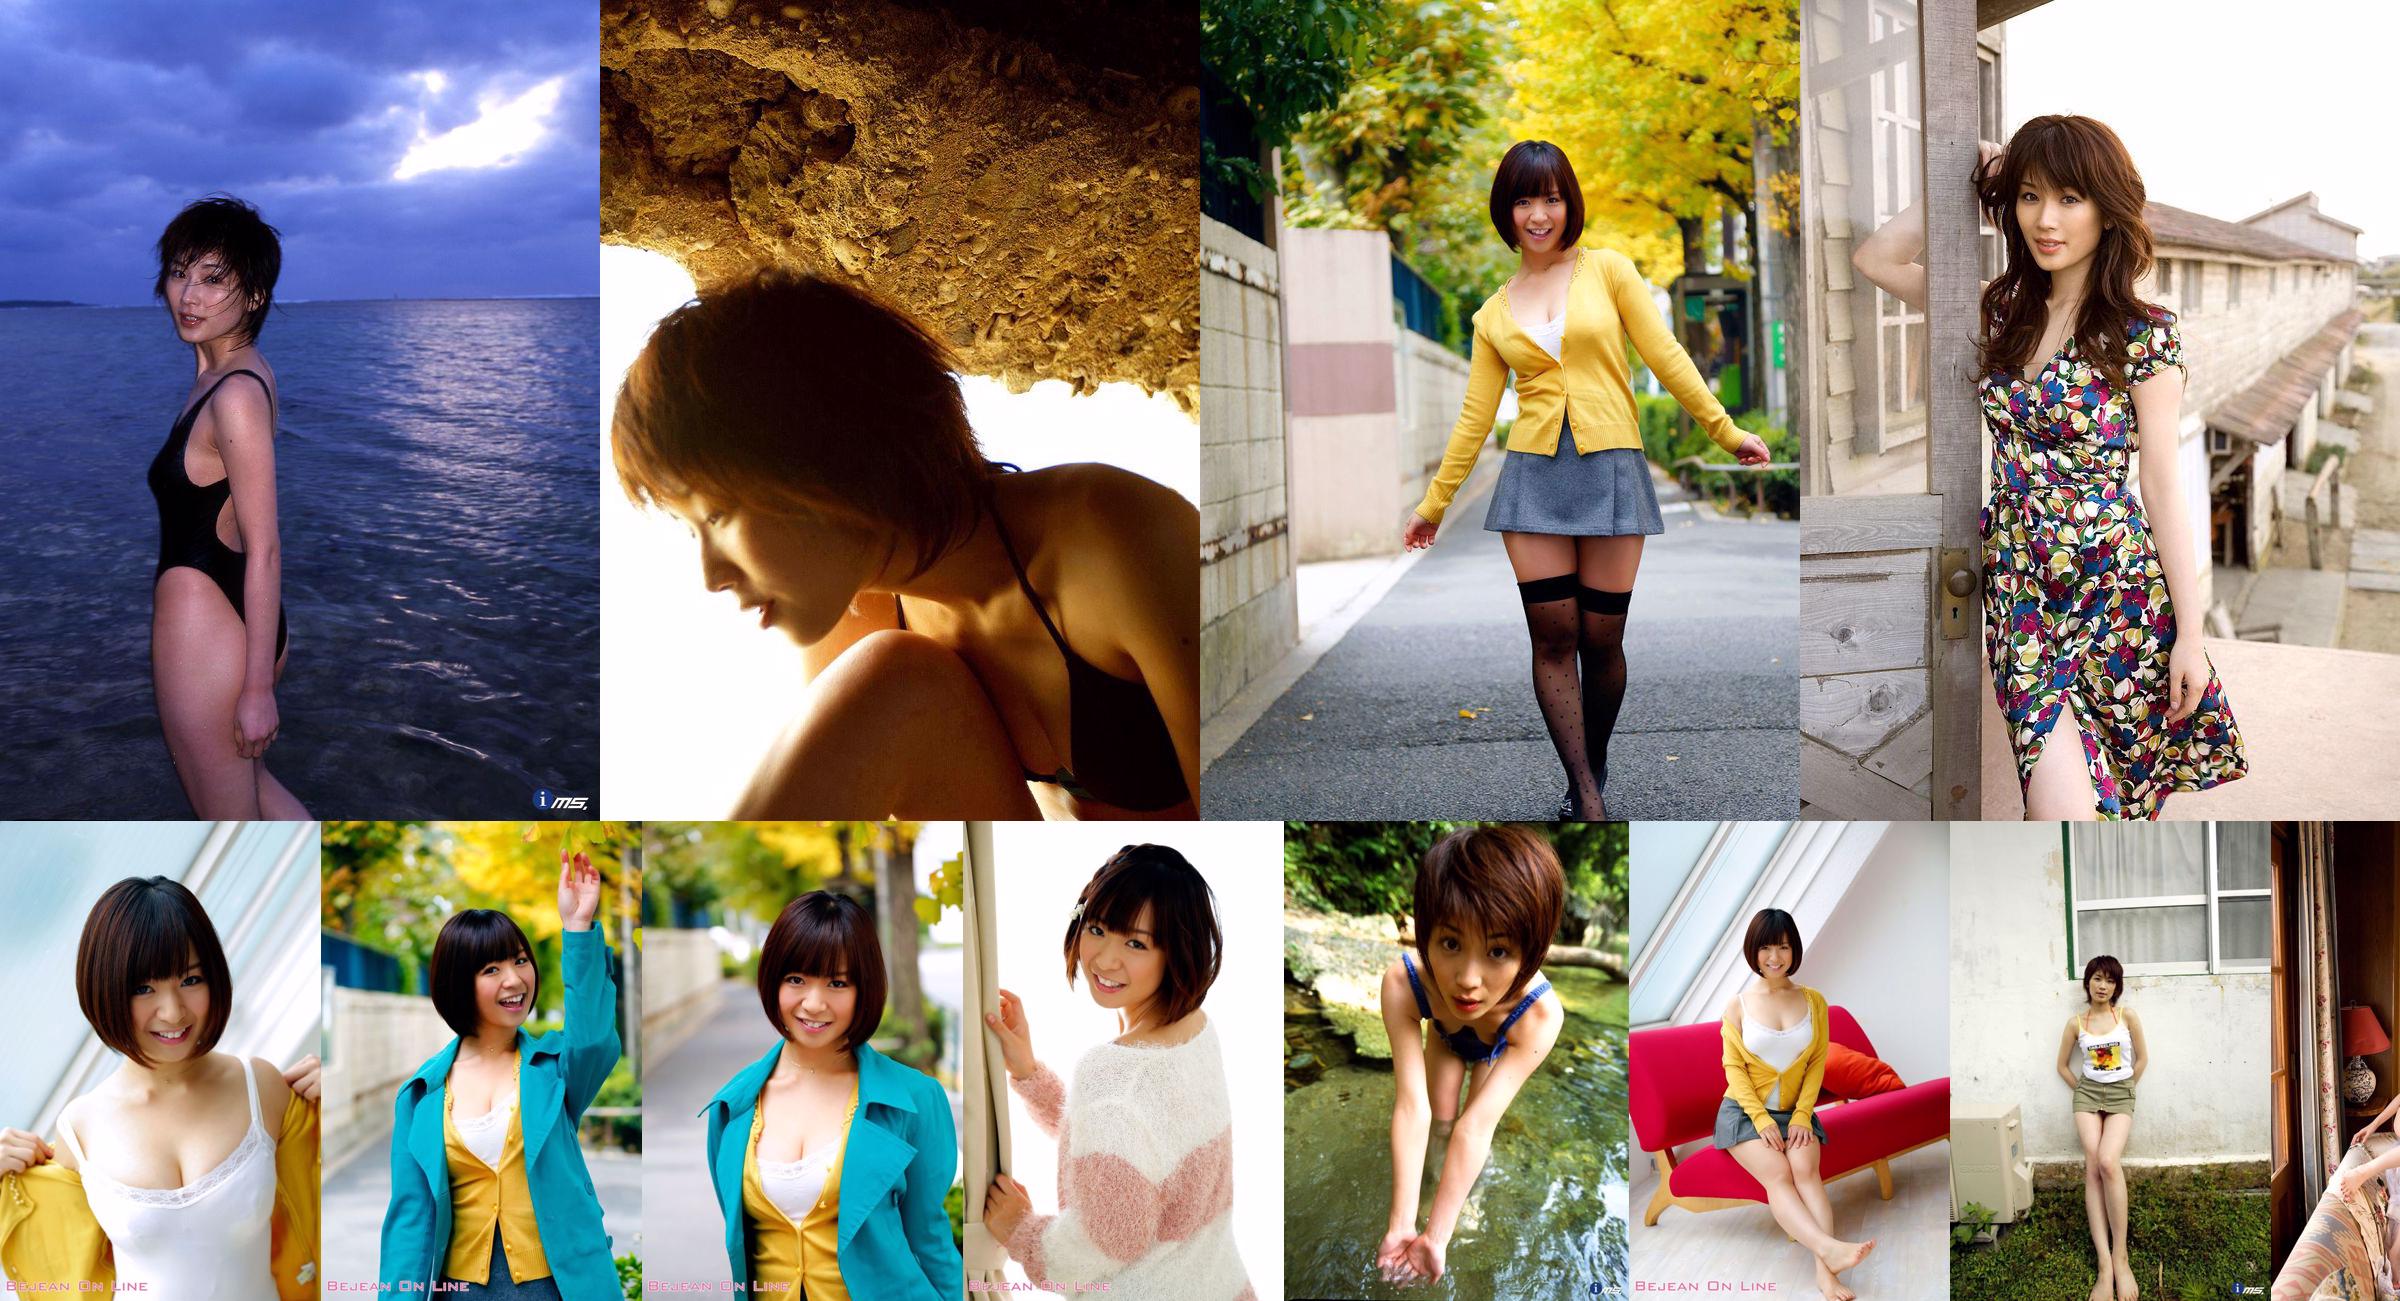 Ayaka Onoue "Just the way you are" [Image.tv] No.f7052b Page 4